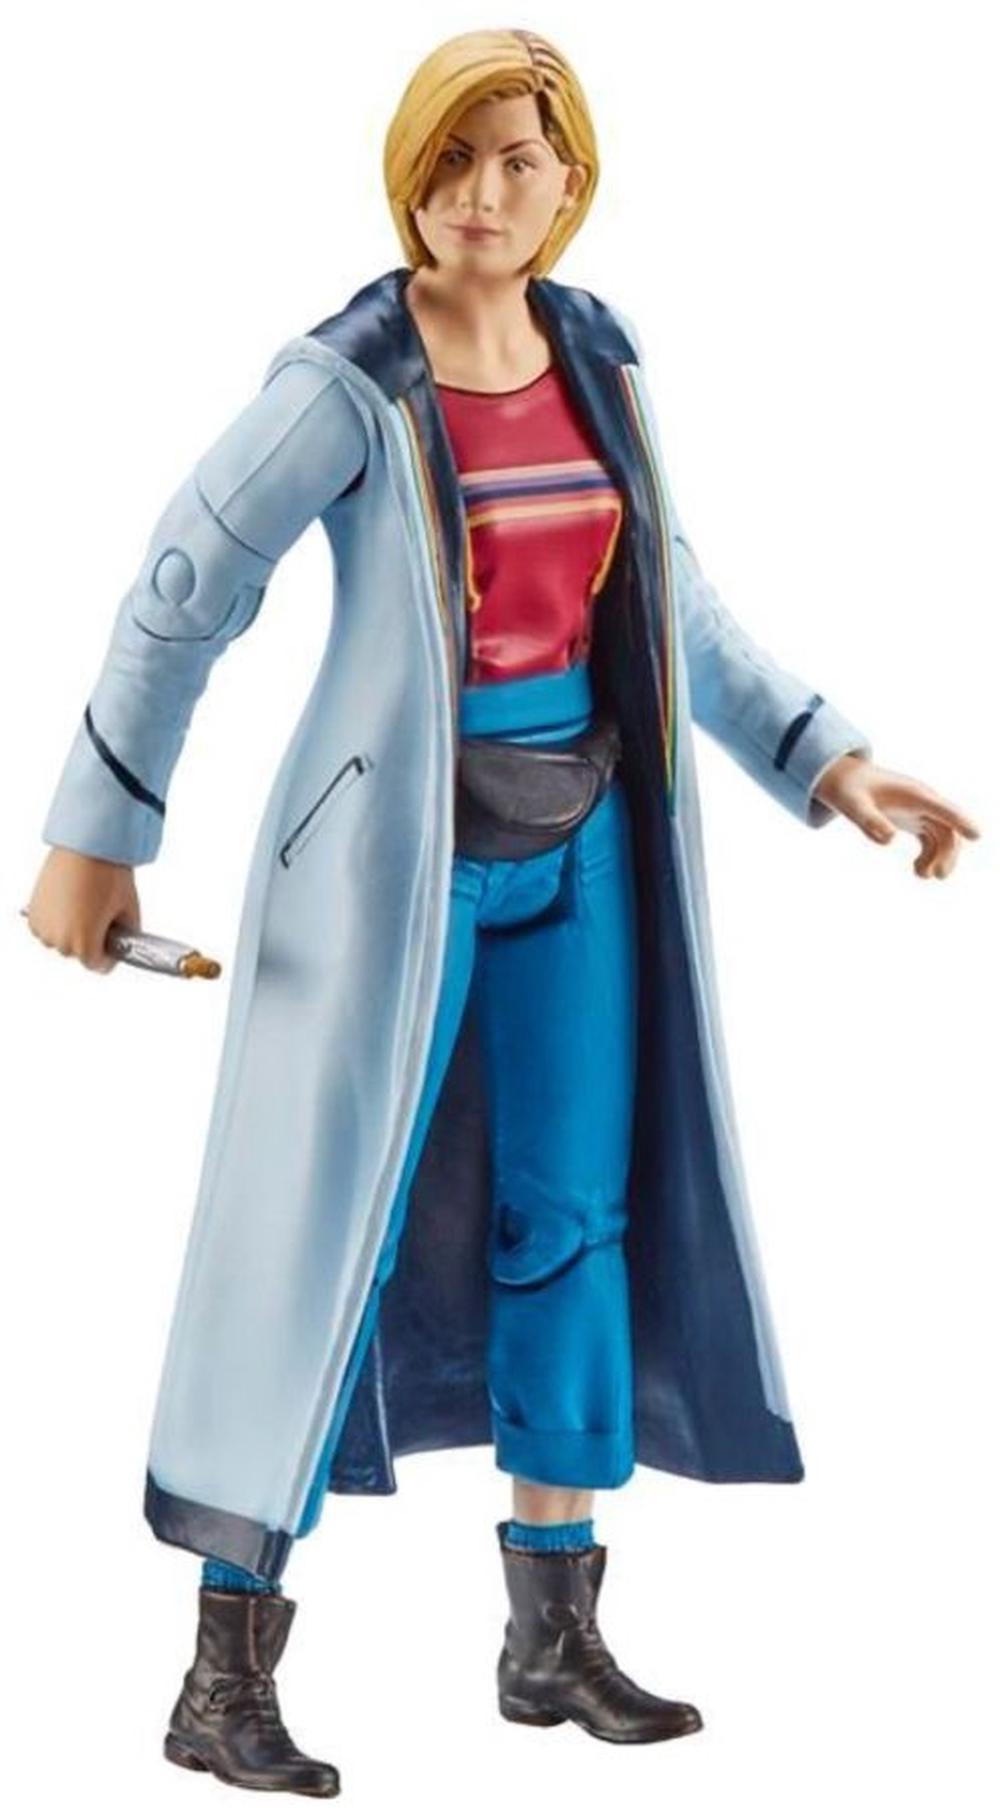 DOCTOR WHO THE THIRTEENTH DOCTOR 5.5" ACTION FIGURE NEW